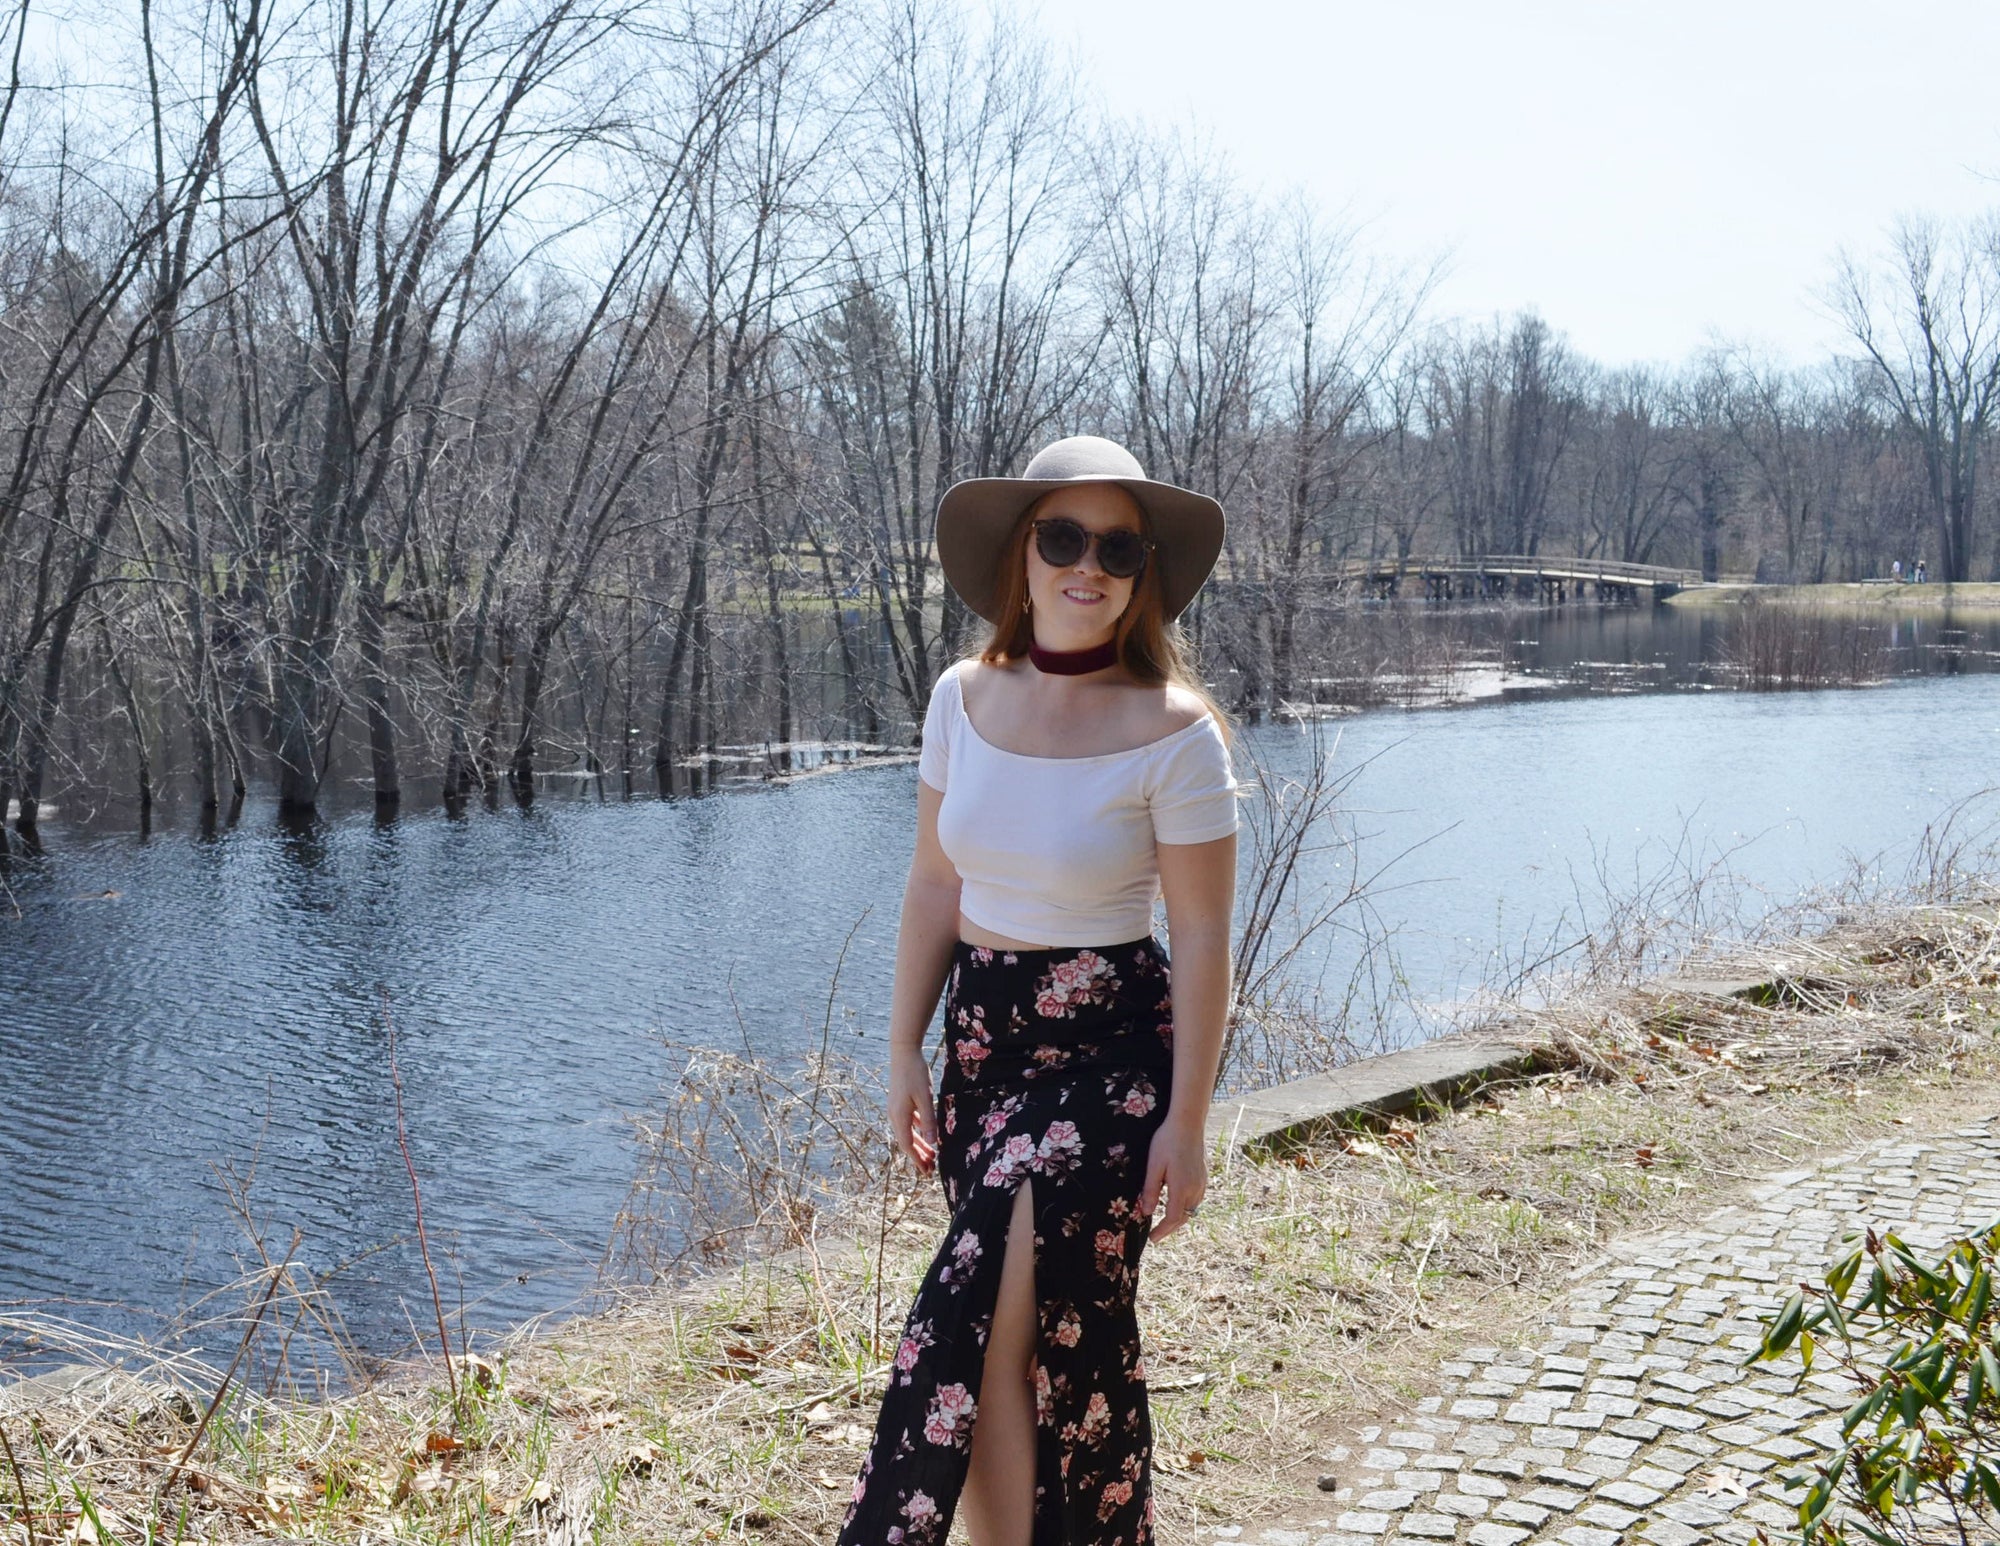 Spring 2017 Festival Insprired floral outfit